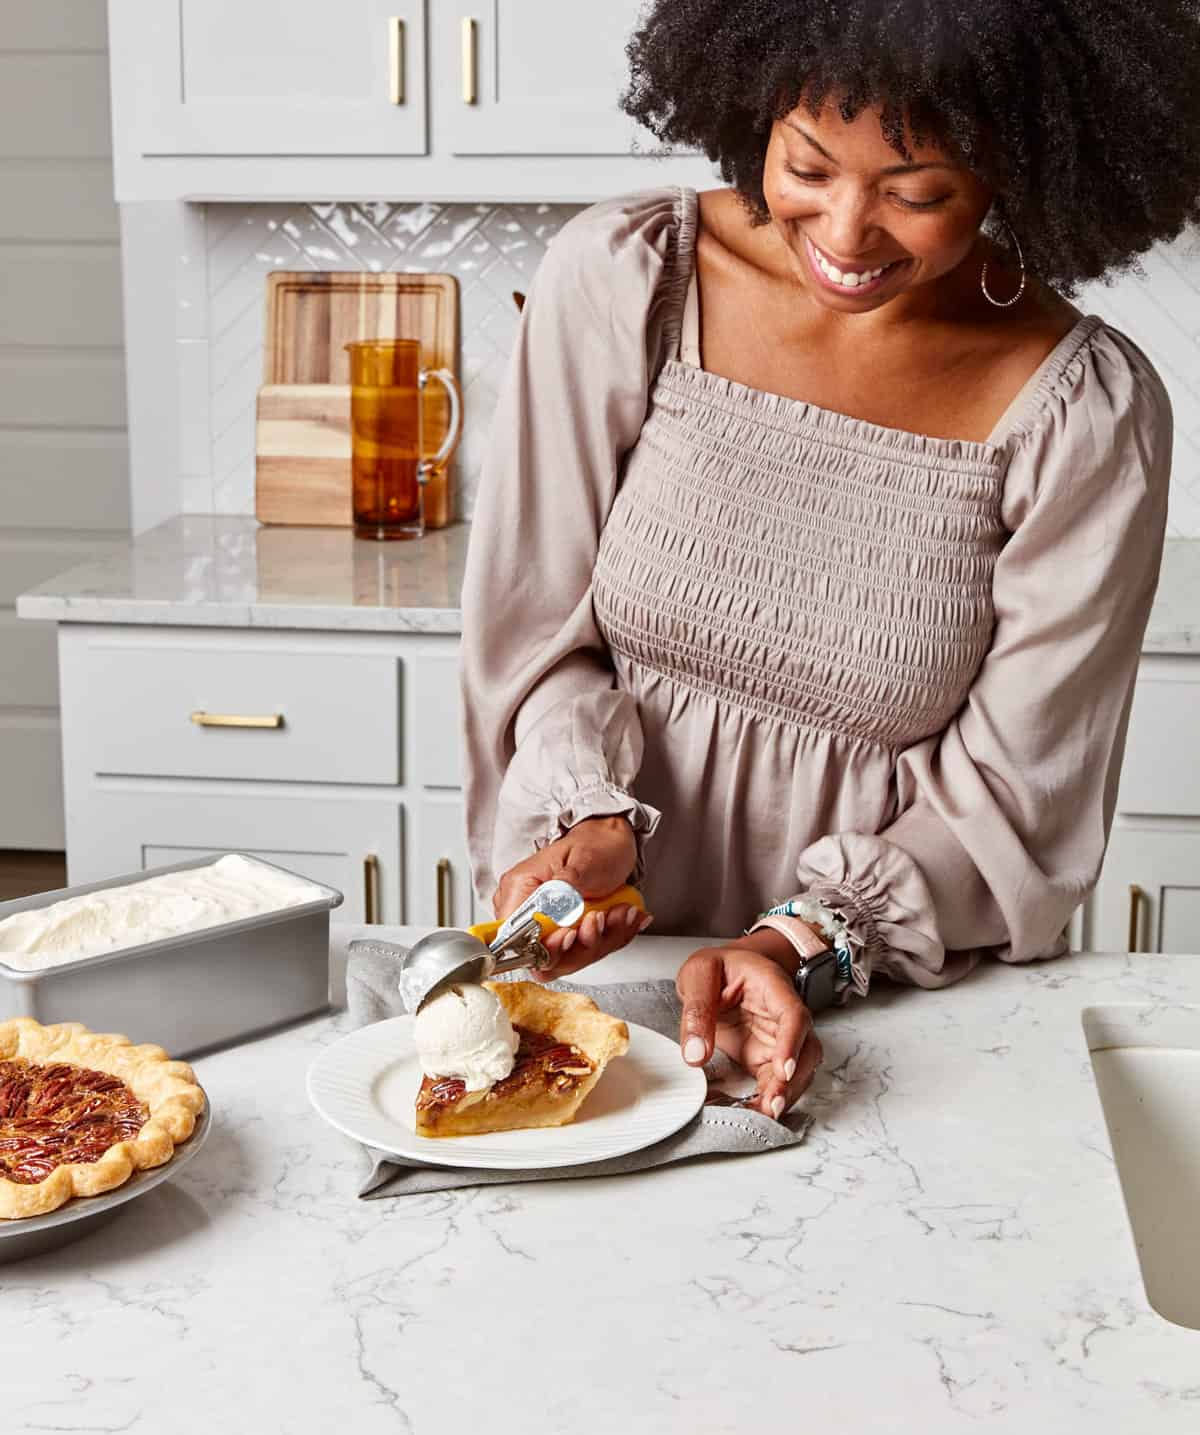 Black woman adding a scoop of ice cream to a slice of pecan pie.